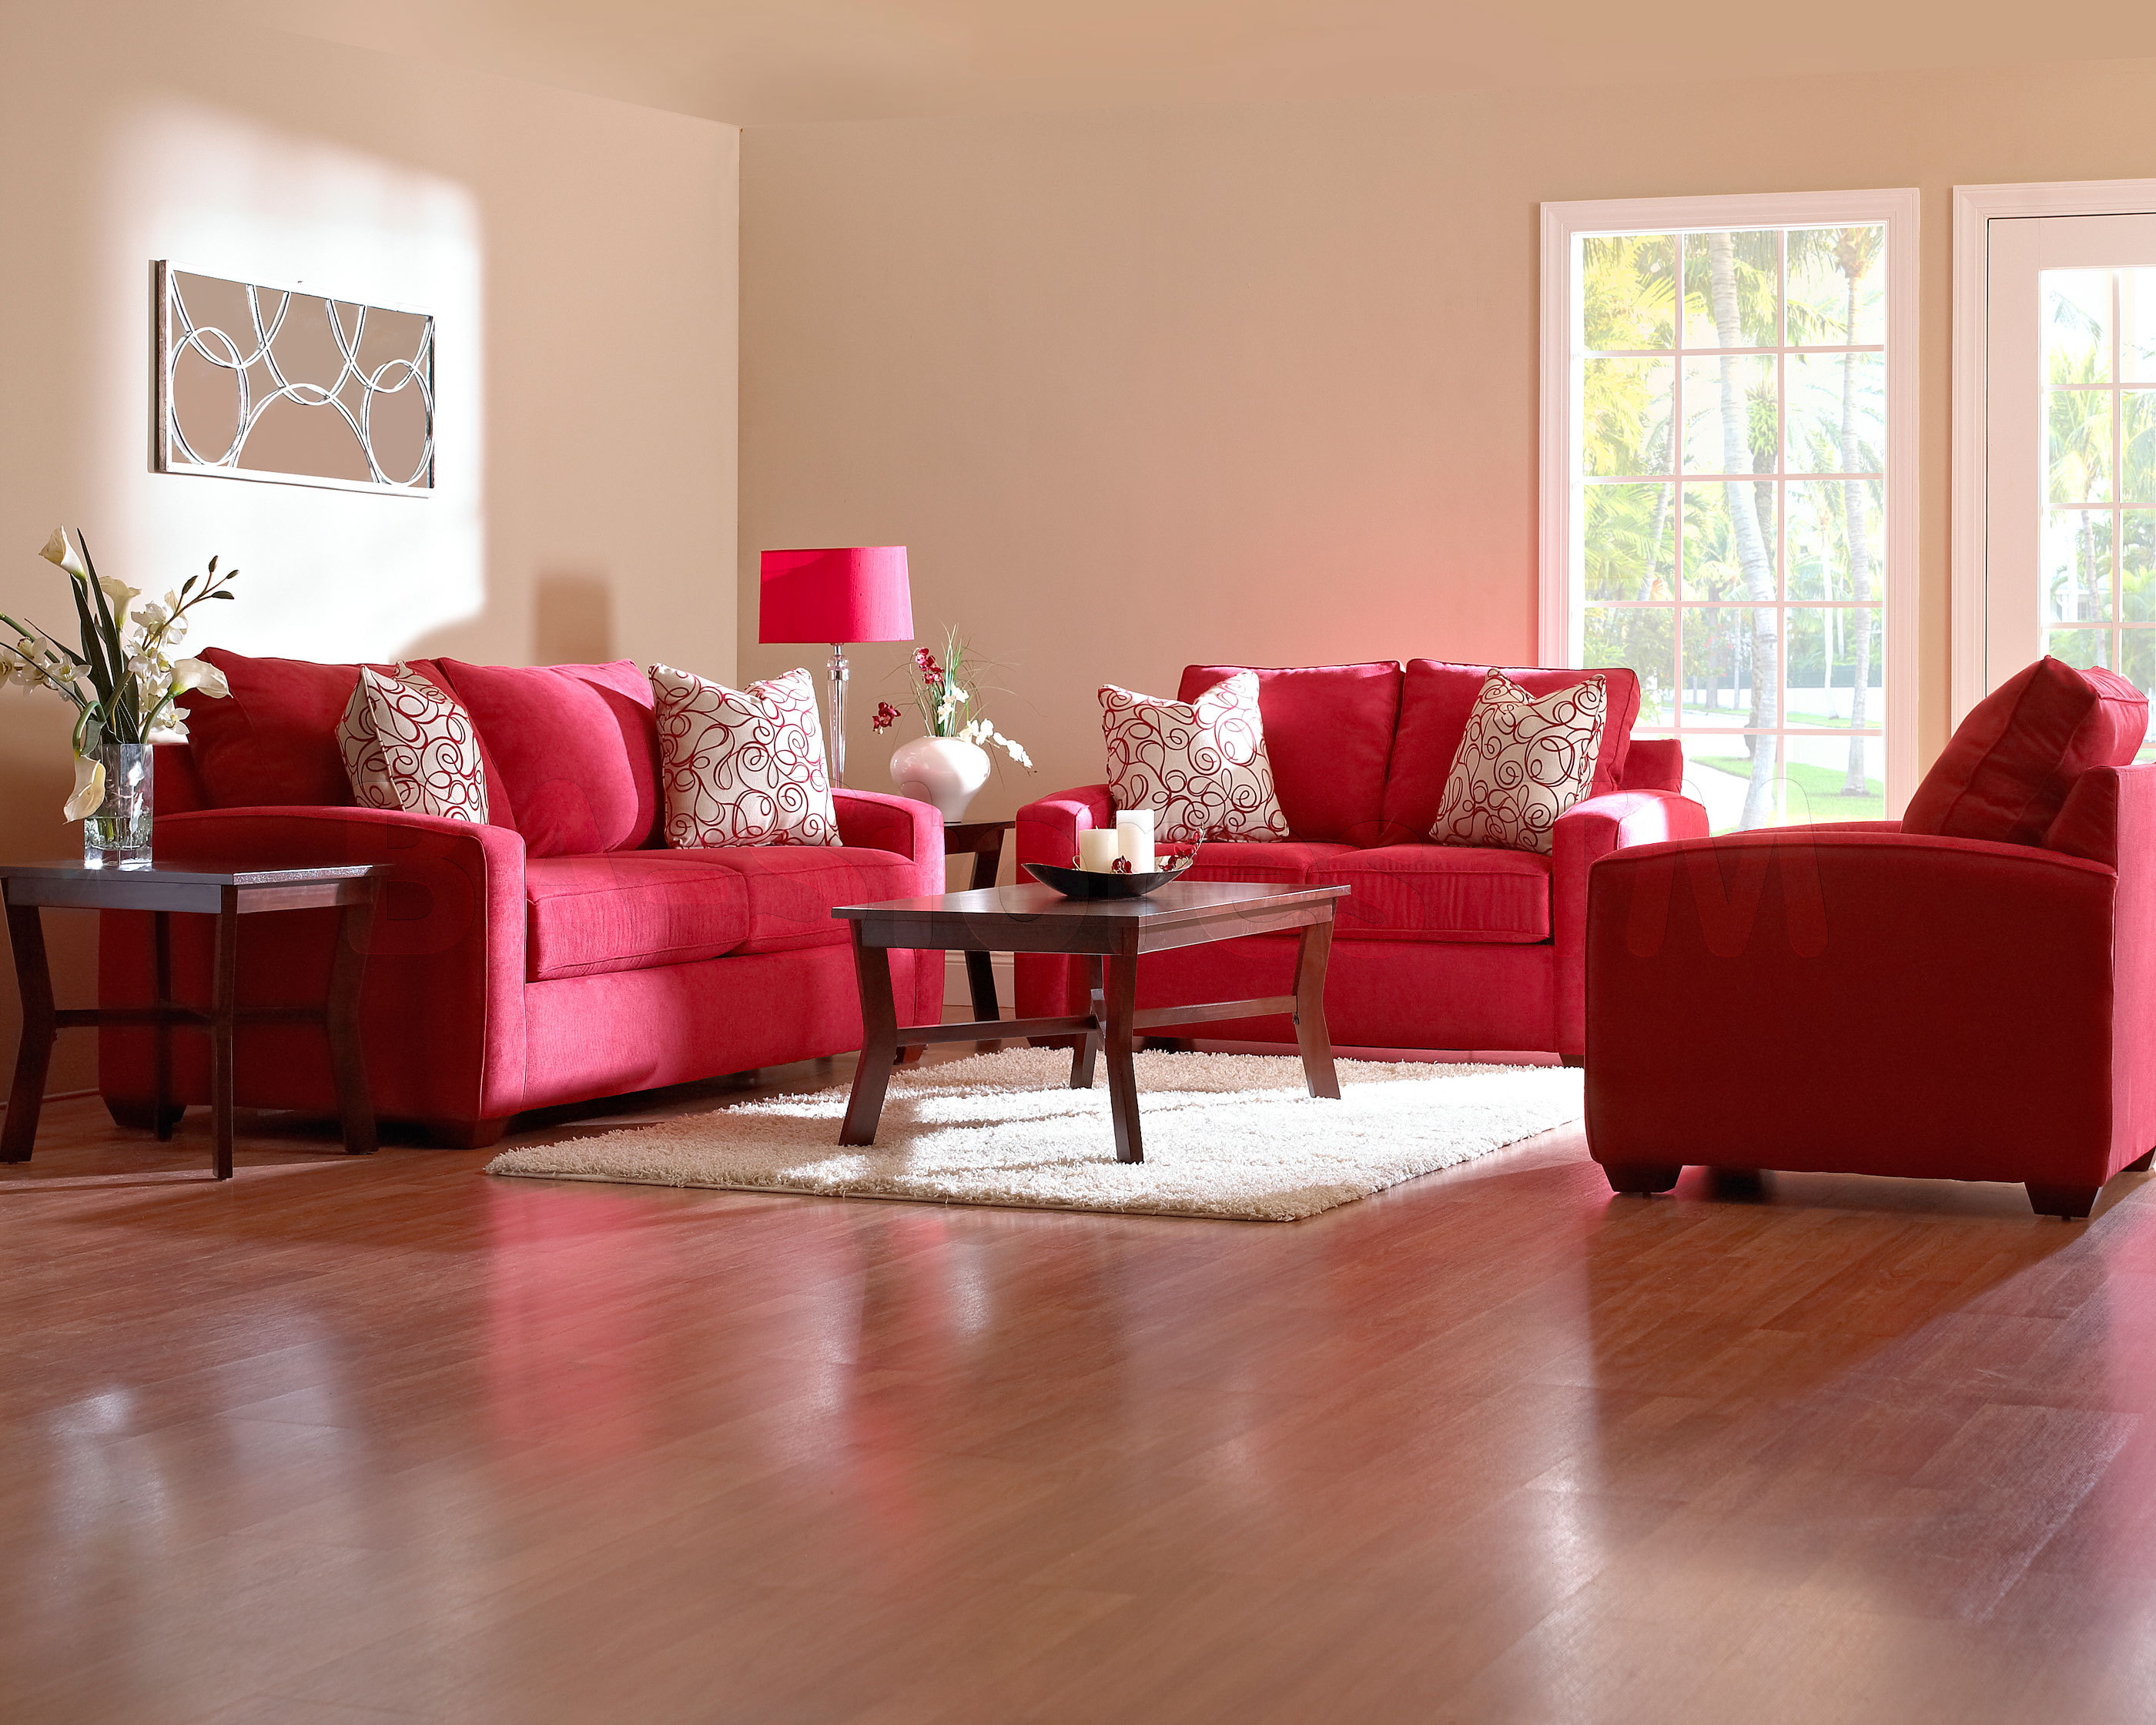 Living Room Colors With Red Sofa